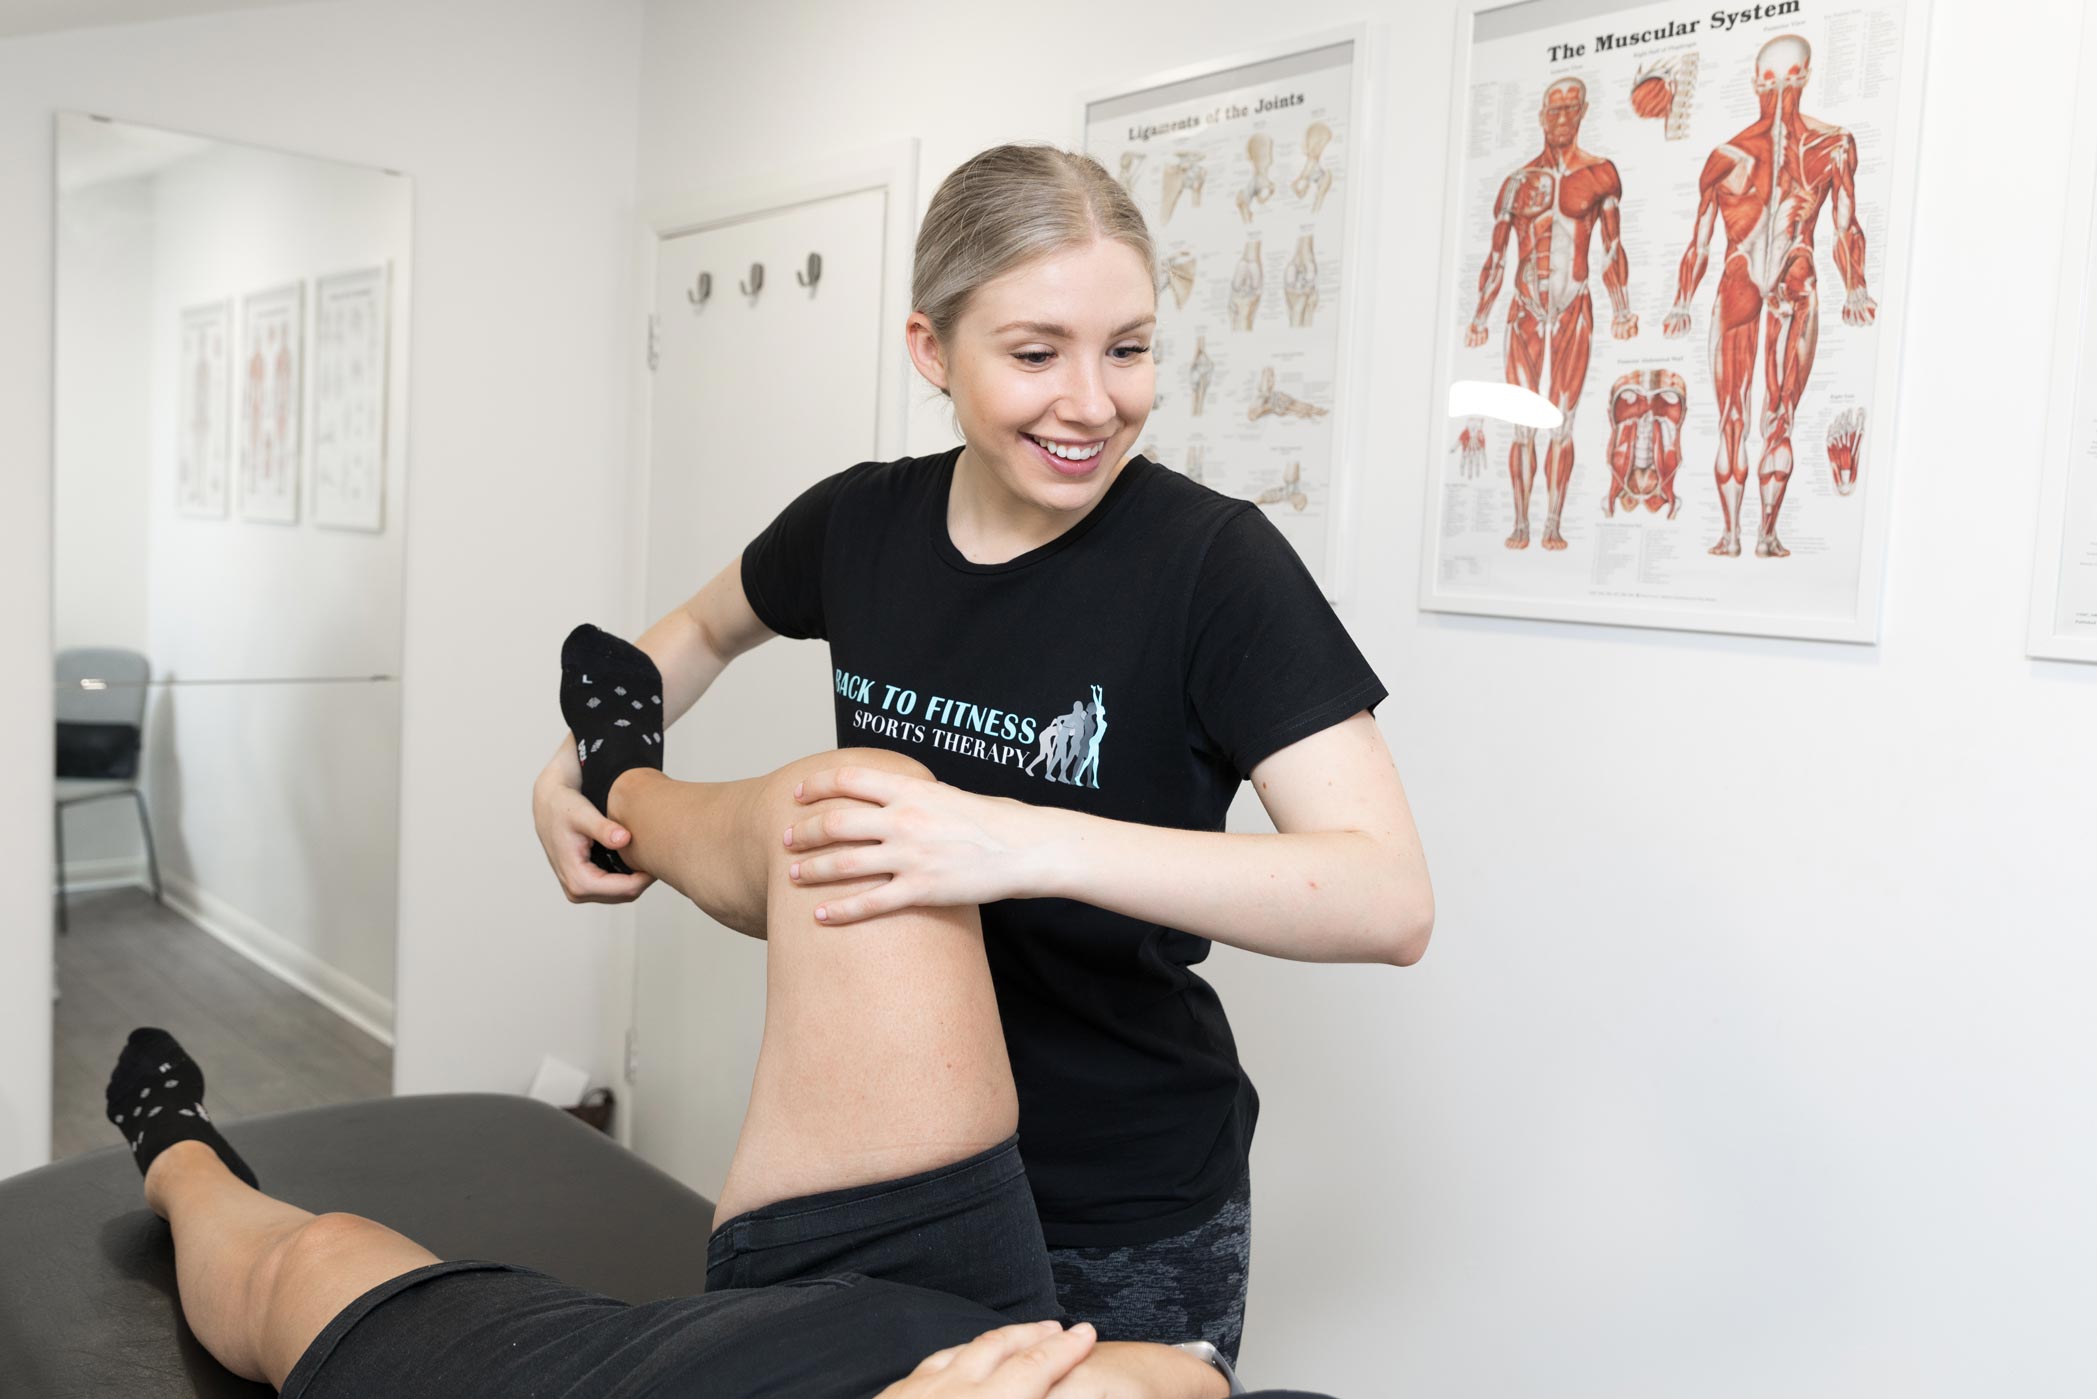 A sports massage therapist works with a patient in her Croydon clinic as part of a London health & fitness personal branding photography shoot